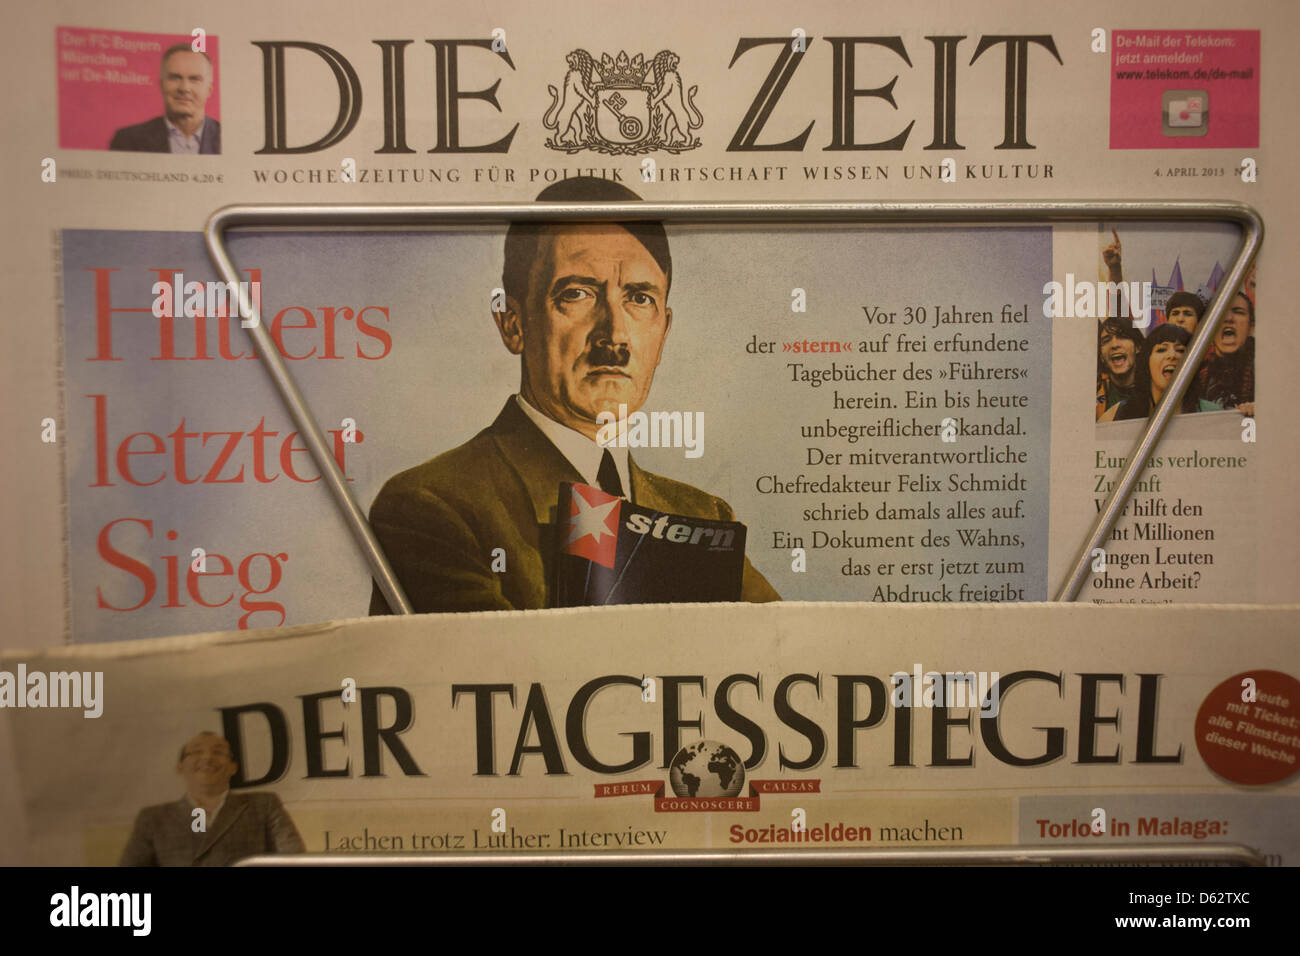 The German national newspaper Die Zeit displays a picture of National Socialist party leader (Nazi) Adolf Hitler on their front page, a feature about Stern Magazine's controversial Hitler Diaries scandal, 30 years ago. Stock Photo